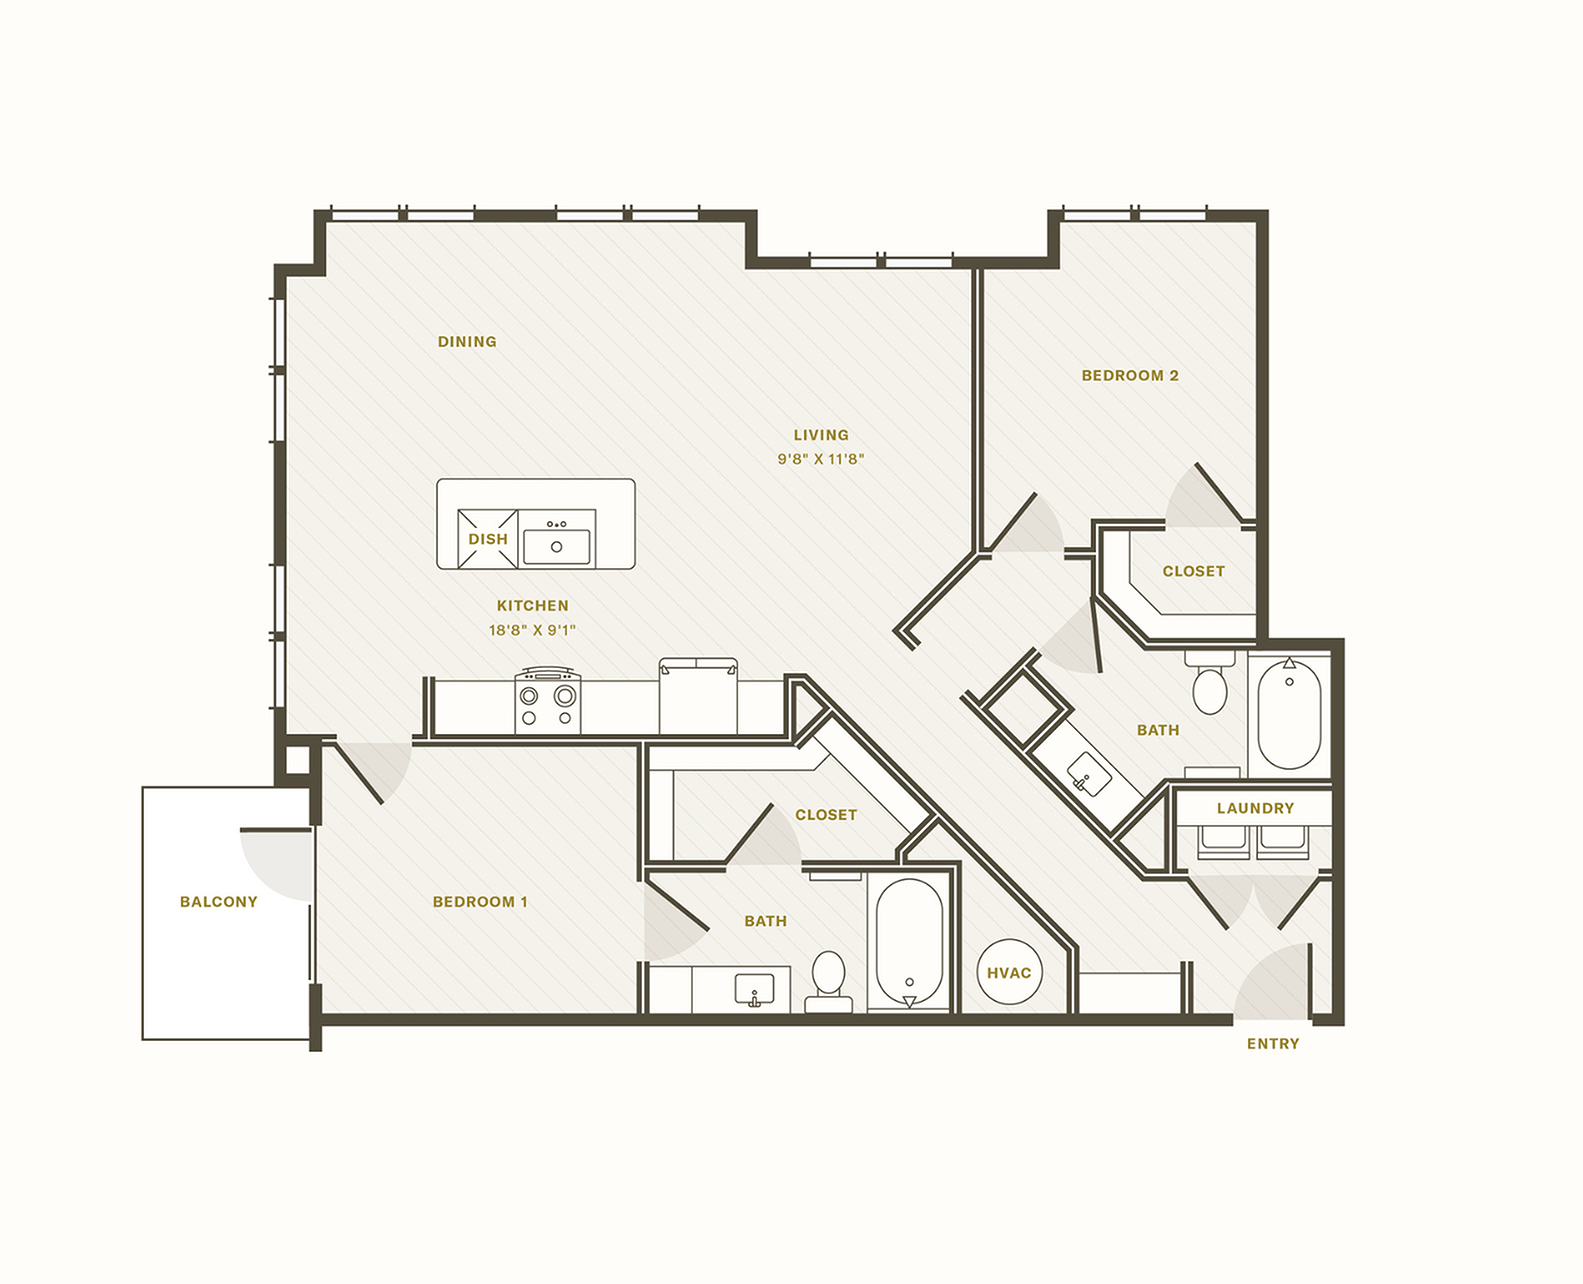 The Elevated floor plan